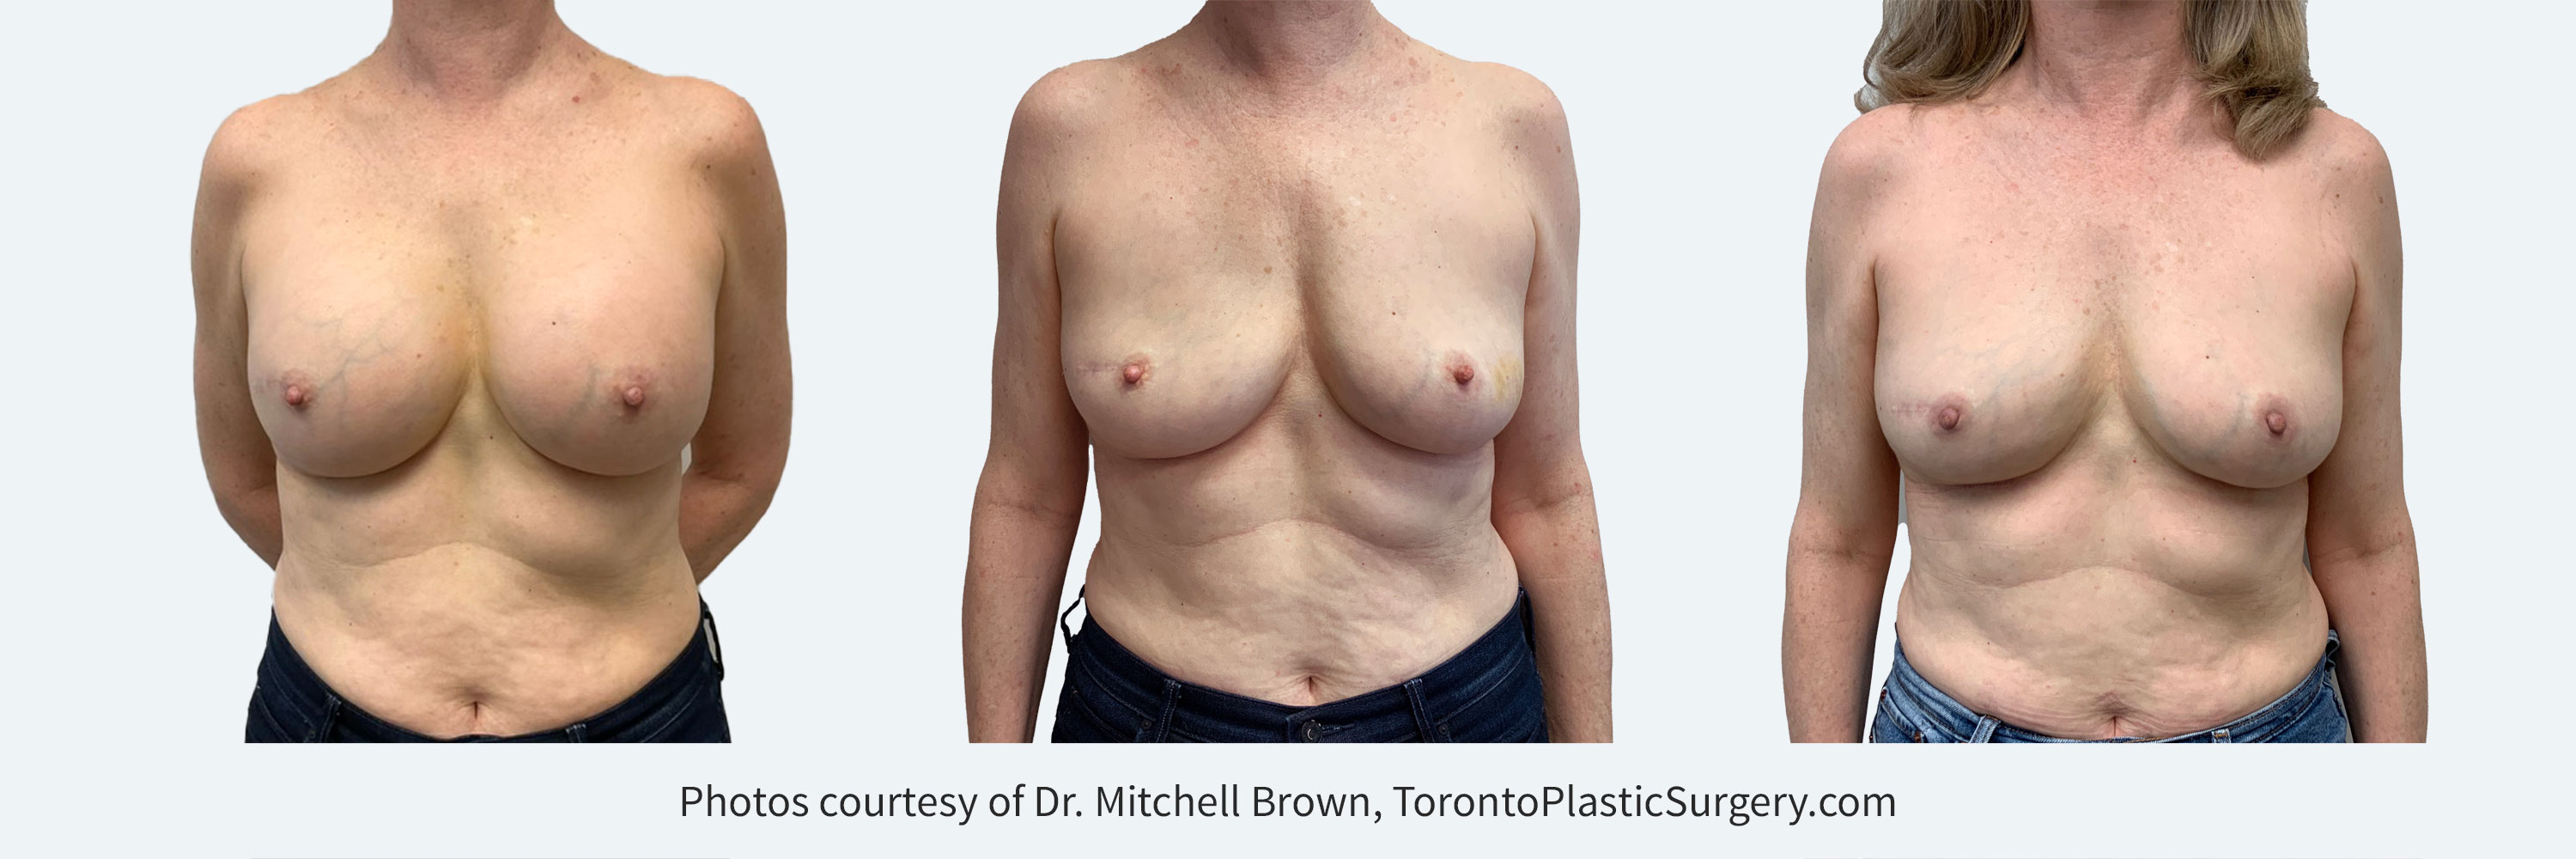 Inverted Nipple Treatments in Toronto